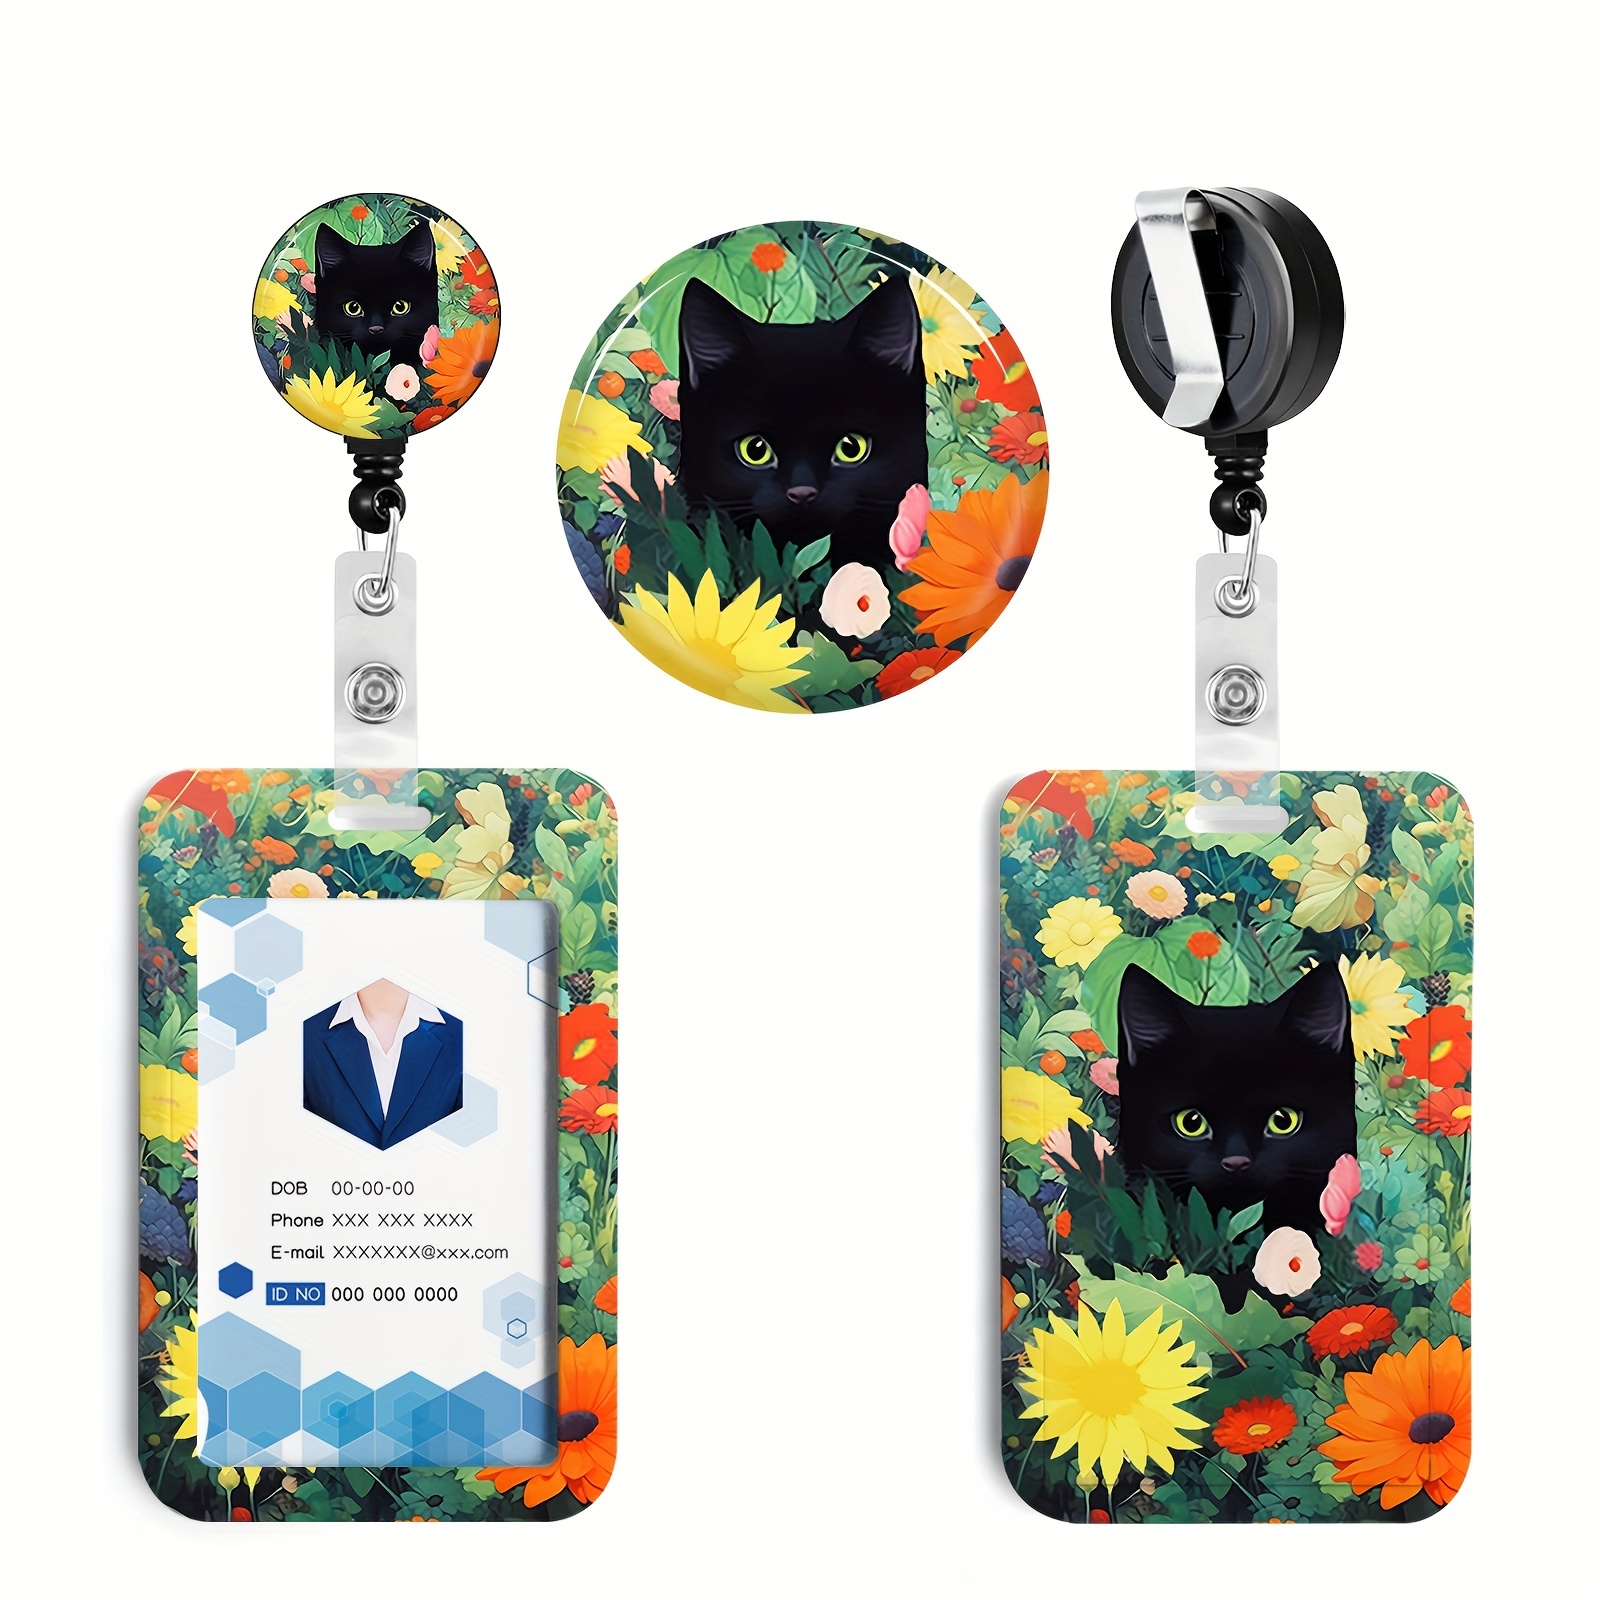  Id Badge Holder with Lanyard,Black Cat Retractable